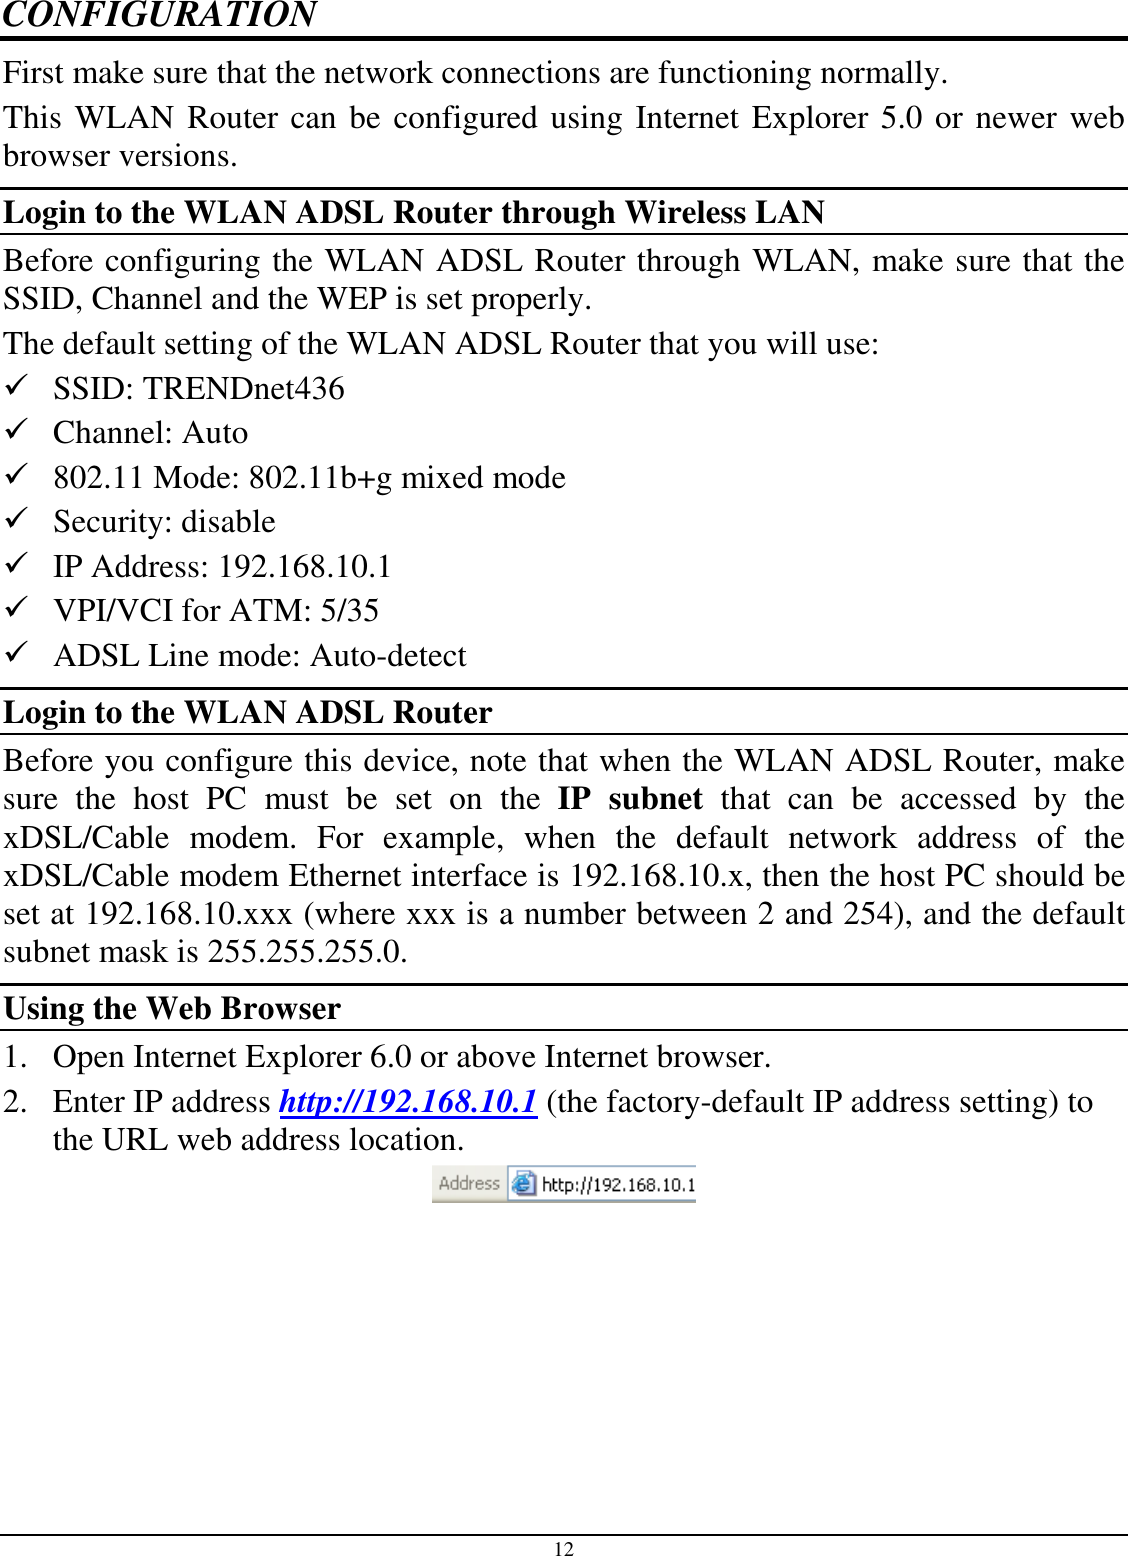 12 CONFIGURATION First make sure that the network connections are functioning normally.  This WLAN Router can be configured using Internet Explorer 5.0 or newer web browser versions. Login to the WLAN ADSL Router through Wireless LAN Before configuring the WLAN ADSL Router through WLAN, make sure that the SSID, Channel and the WEP is set properly. The default setting of the WLAN ADSL Router that you will use:  SSID: TRENDnet436  Channel: Auto  802.11 Mode: 802.11b+g mixed mode  Security: disable  IP Address: 192.168.10.1  VPI/VCI for ATM: 5/35  ADSL Line mode: Auto-detect Login to the WLAN ADSL Router Before you configure this device, note that when the WLAN ADSL Router, make sure  the  host  PC  must  be  set  on  the  IP  subnet  that  can  be  accessed  by  the xDSL/Cable  modem.  For  example,  when  the  default  network  address  of  the xDSL/Cable modem Ethernet interface is 192.168.10.x, then the host PC should be set at 192.168.10.xxx (where xxx is a number between 2 and 254), and the default subnet mask is 255.255.255.0. Using the Web Browser 1. Open Internet Explorer 6.0 or above Internet browser. 2. Enter IP address http://192.168.10.1 (the factory-default IP address setting) to the URL web address location.  